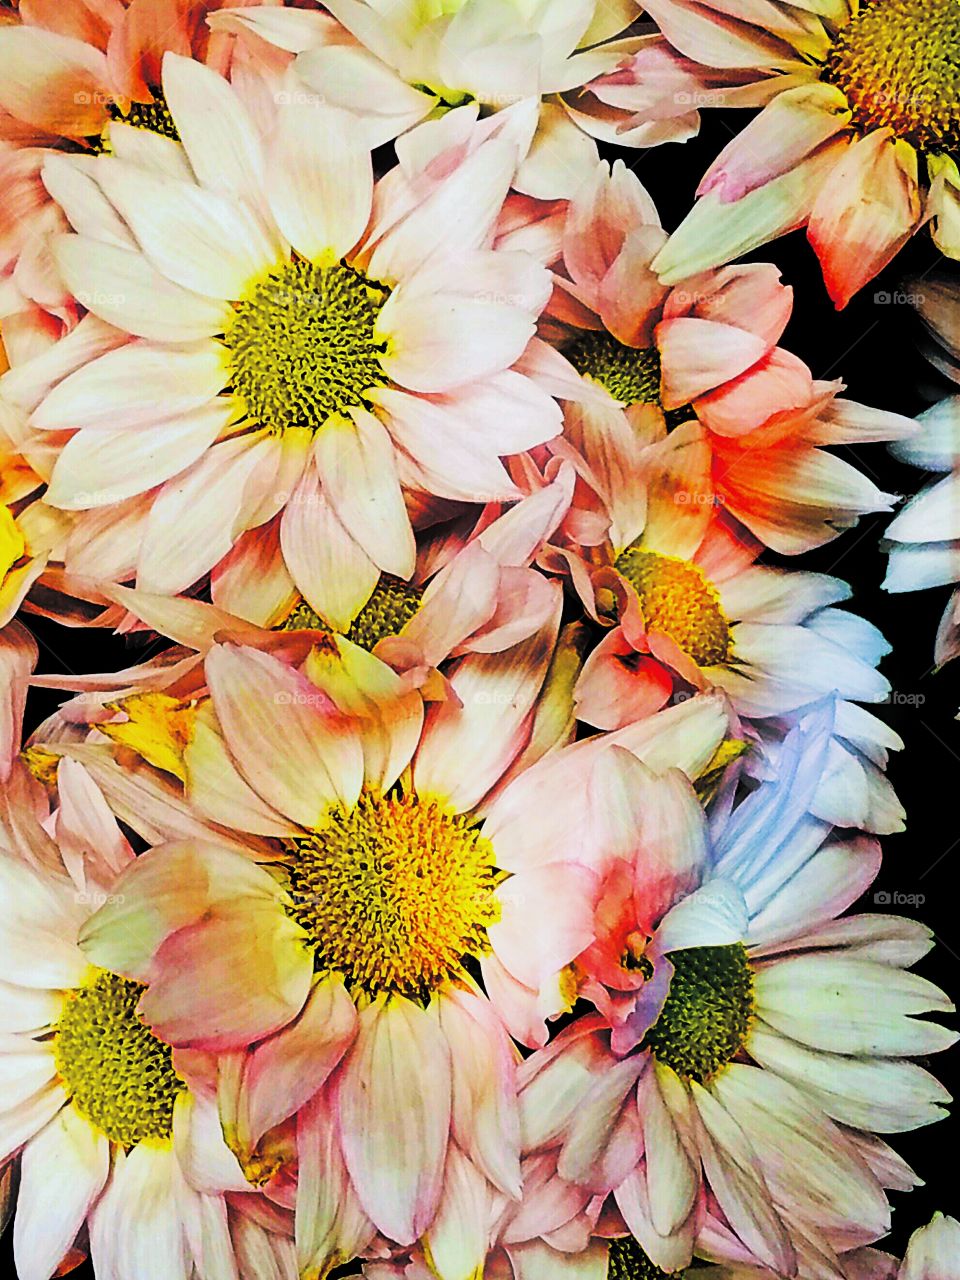 A bunch of very colorful flowers